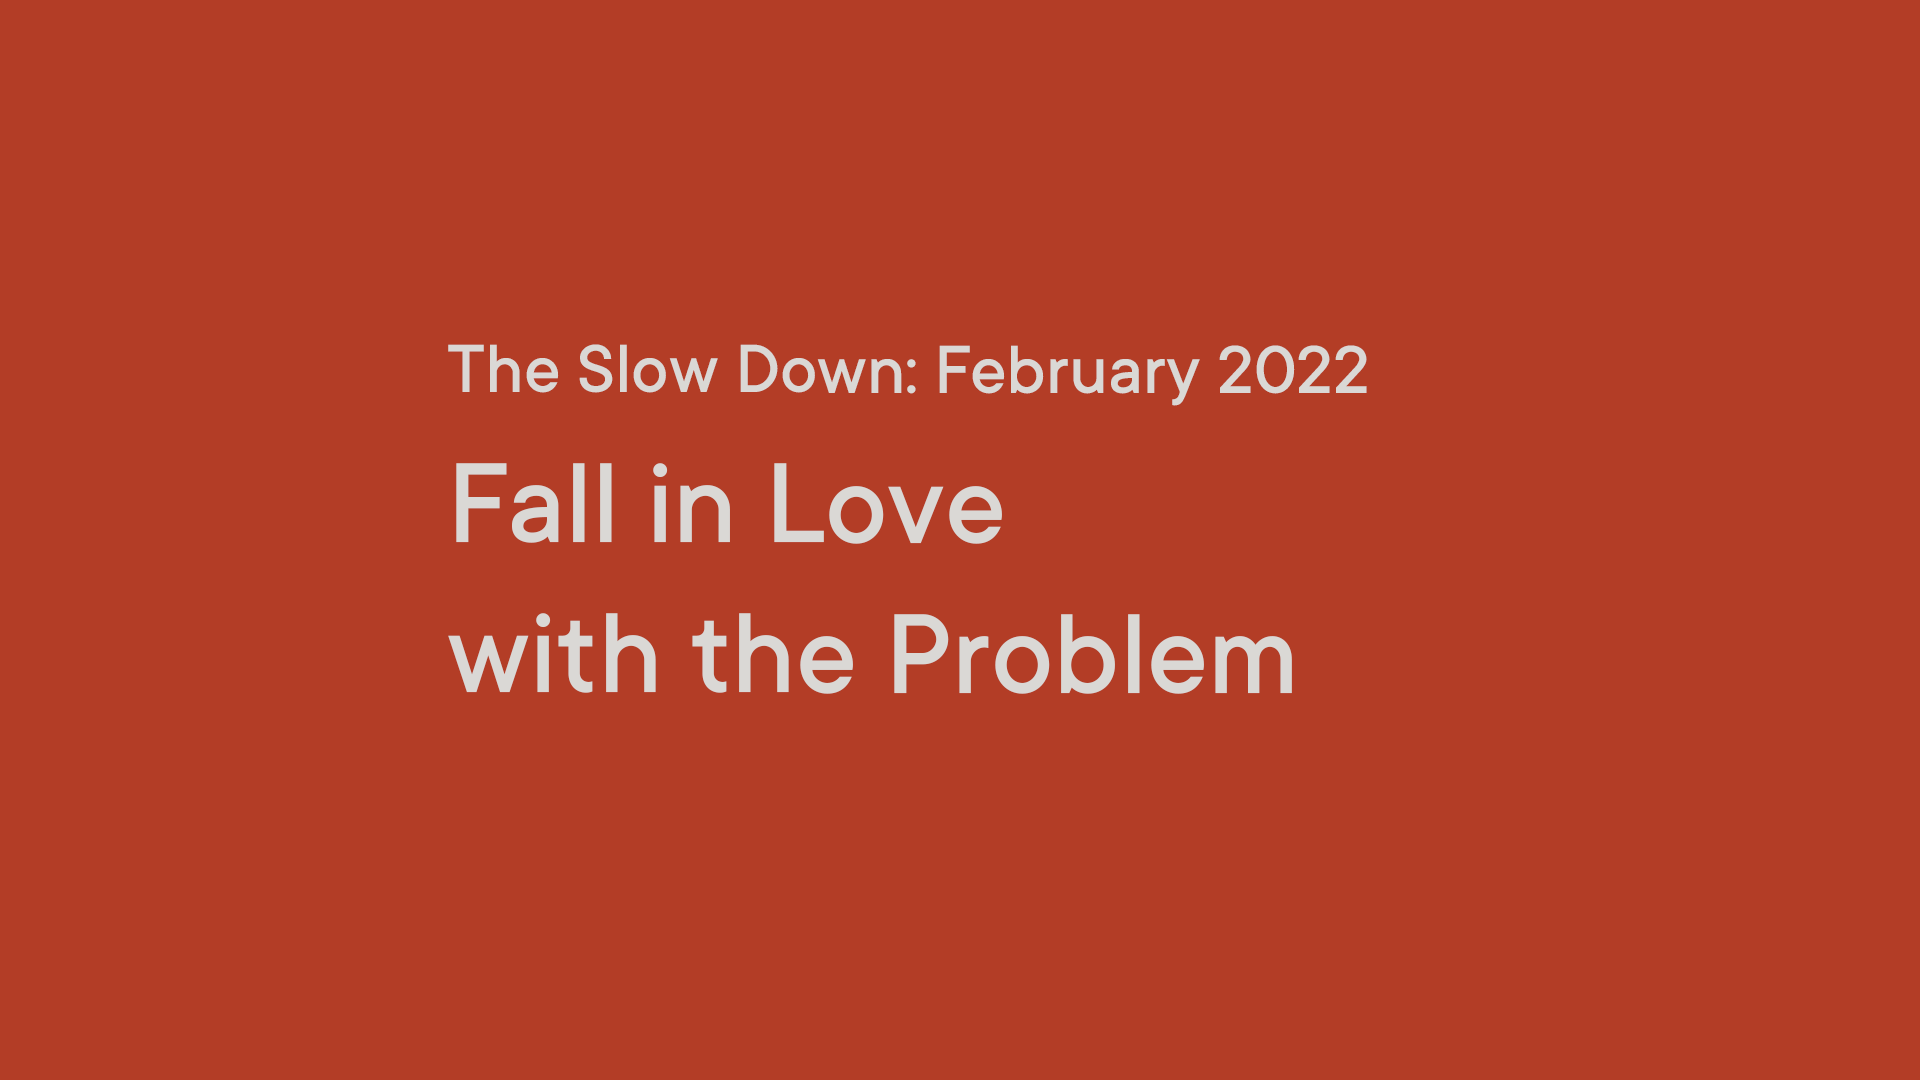 The Slow Down: Fall in Love with a Problem